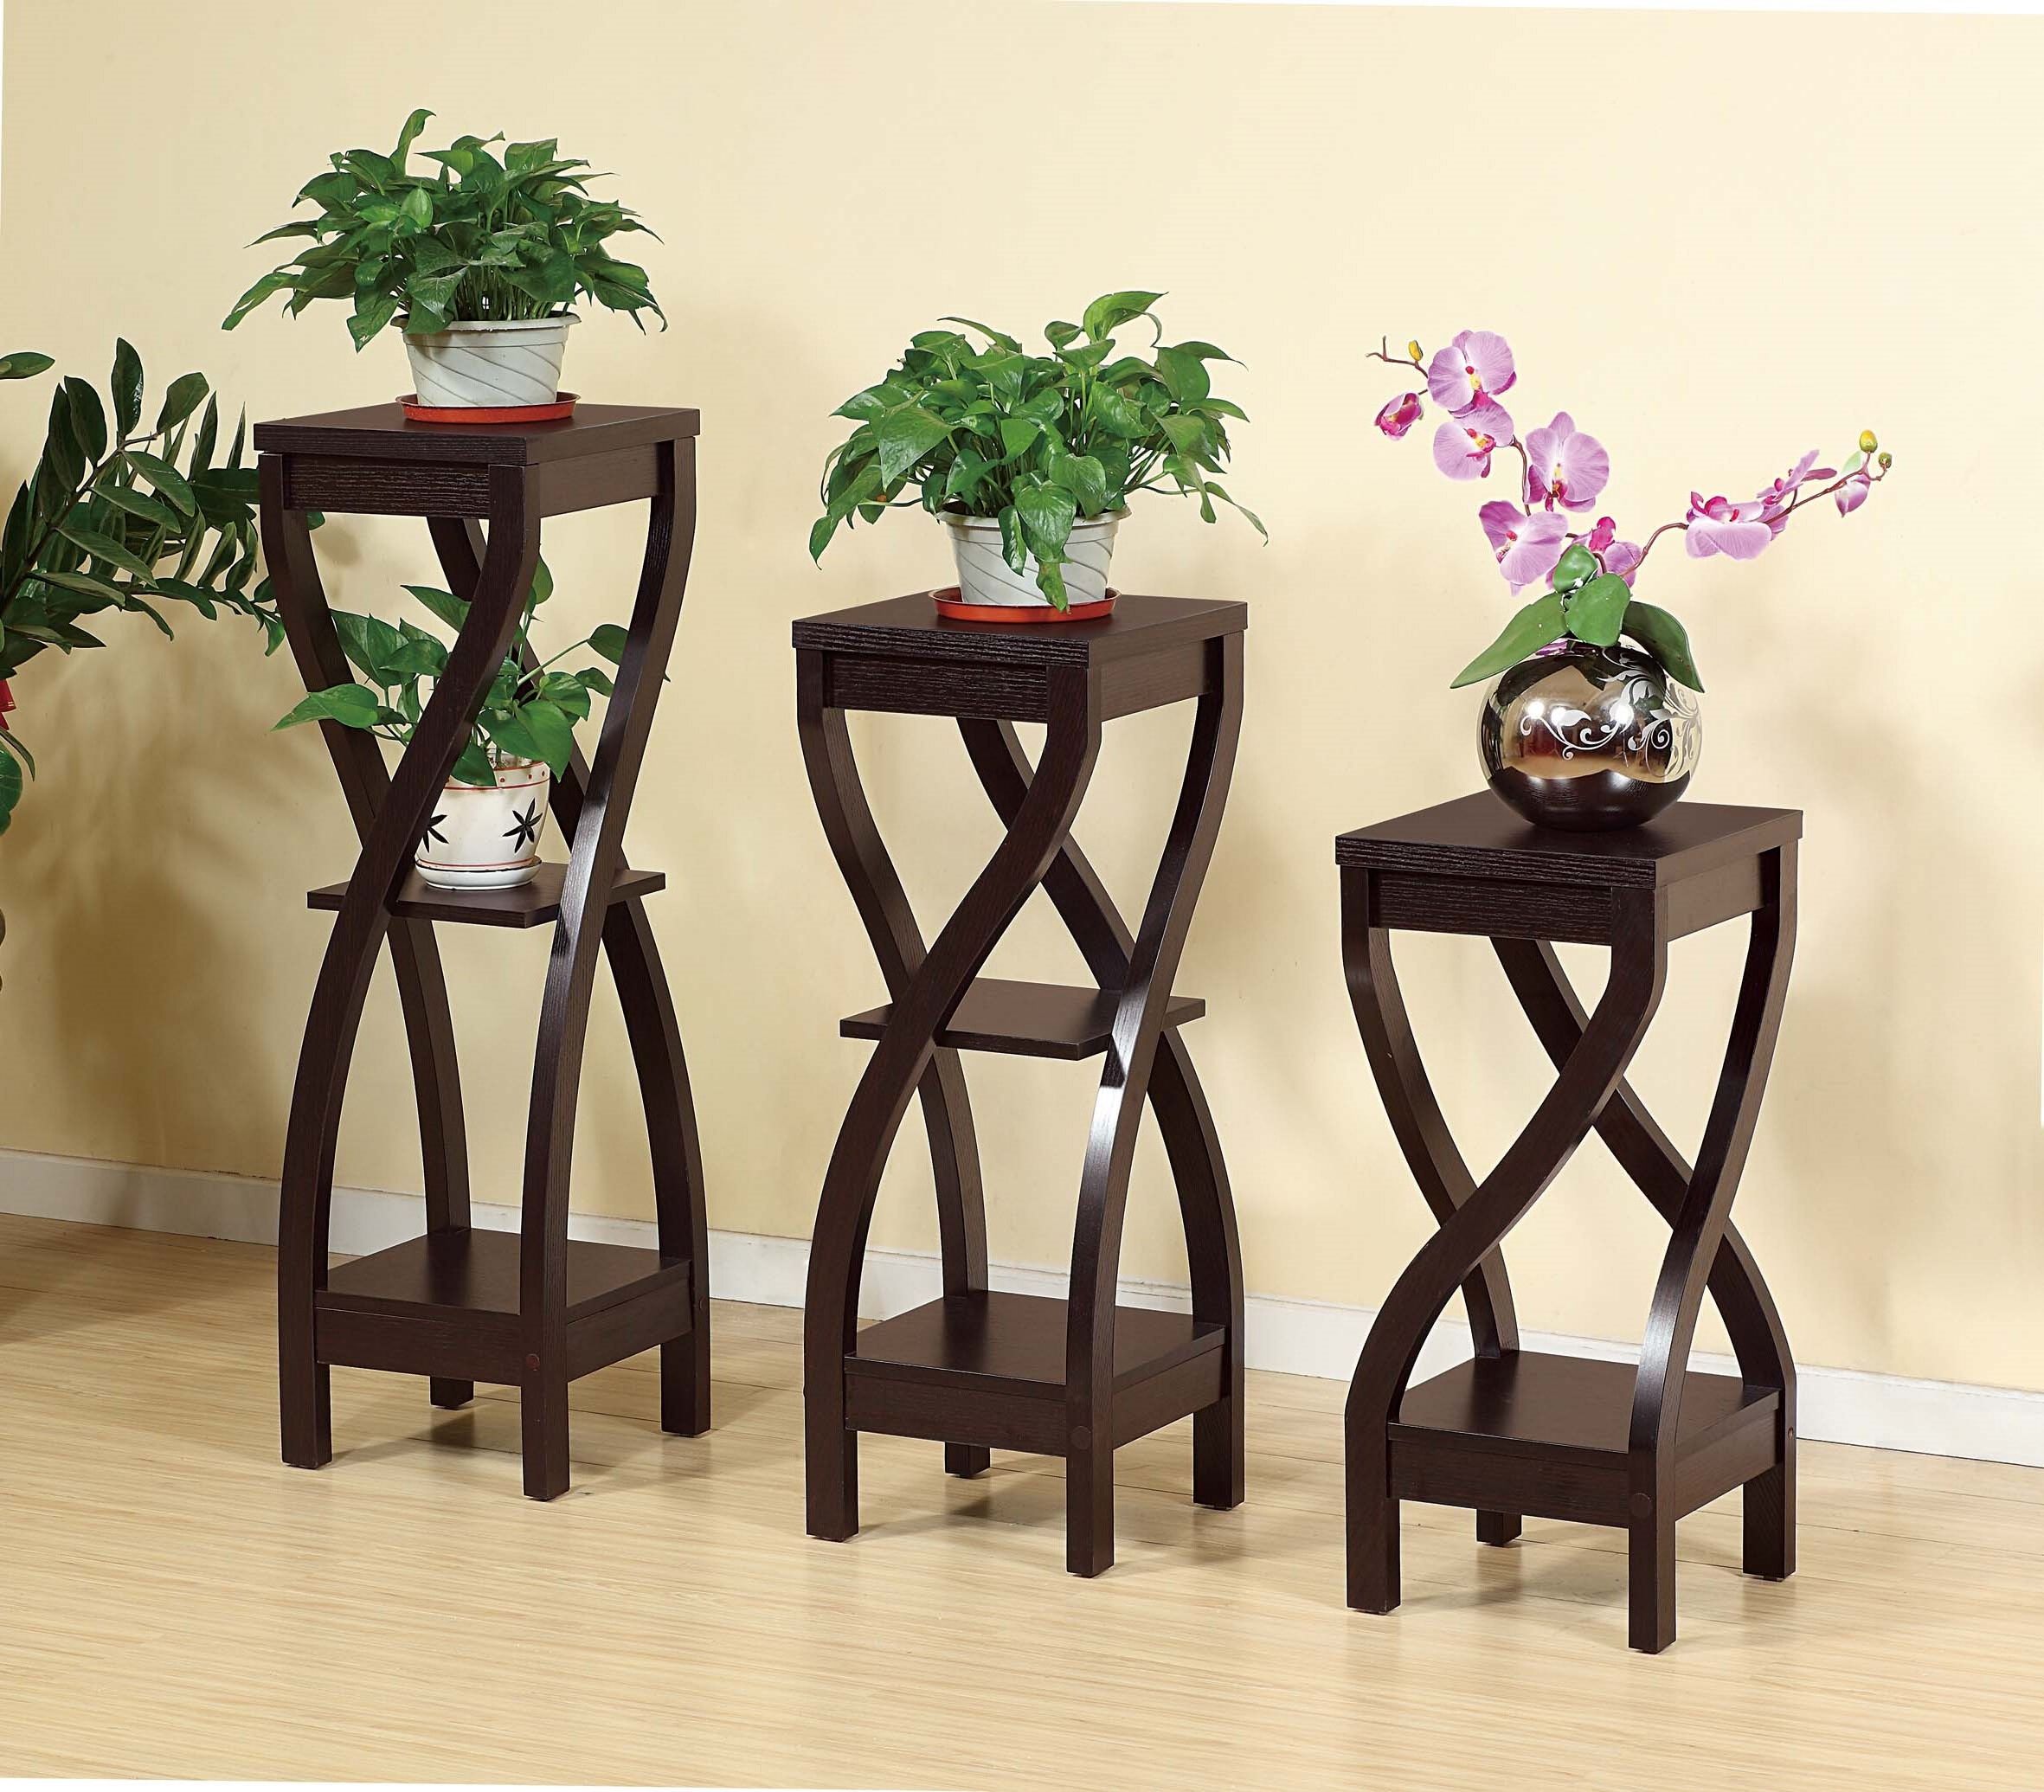 Wayfair In Pedestal Plant Stands (View 4 of 10)